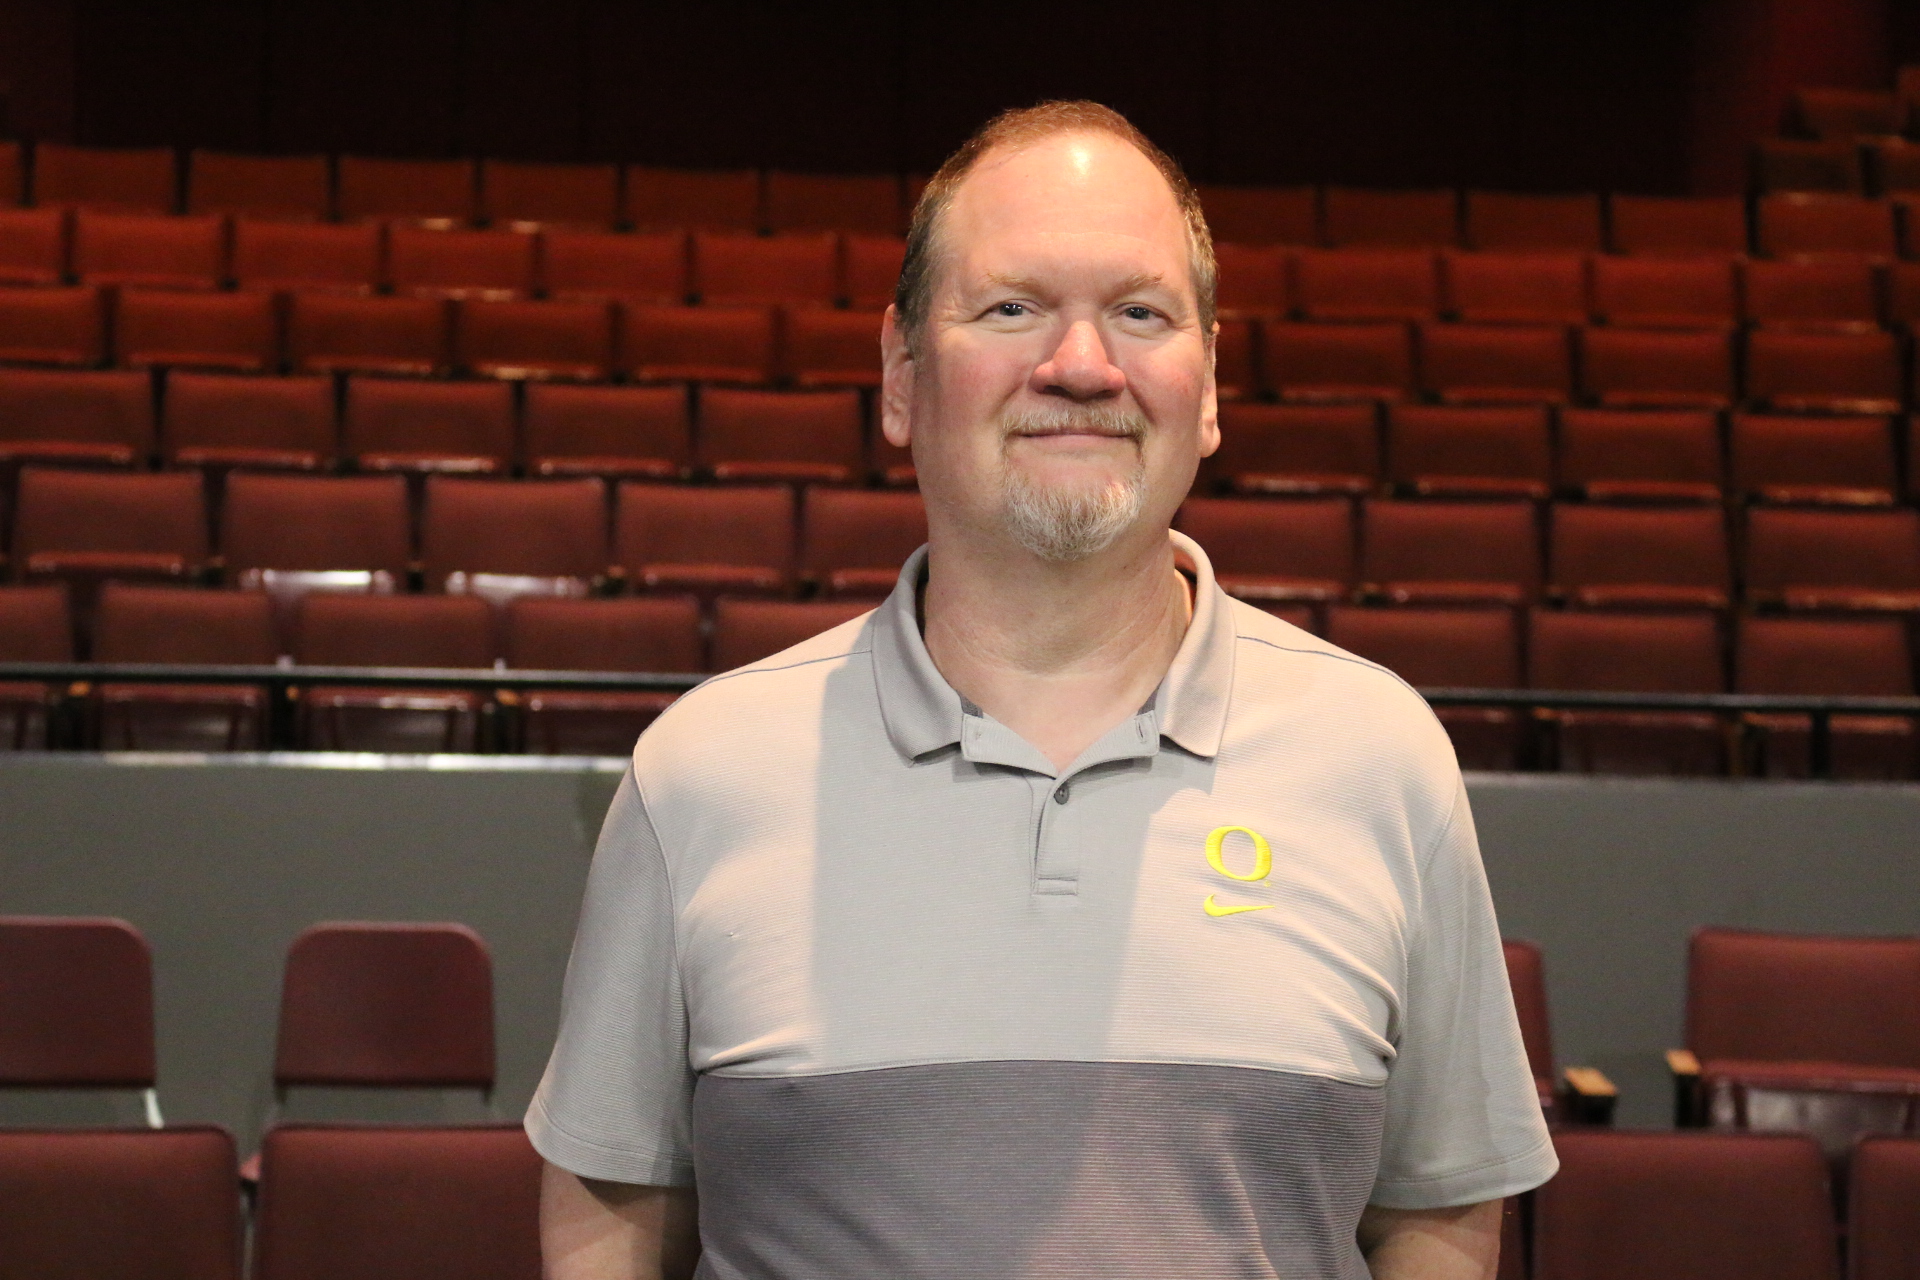 Man stands with auditorium seats behind him